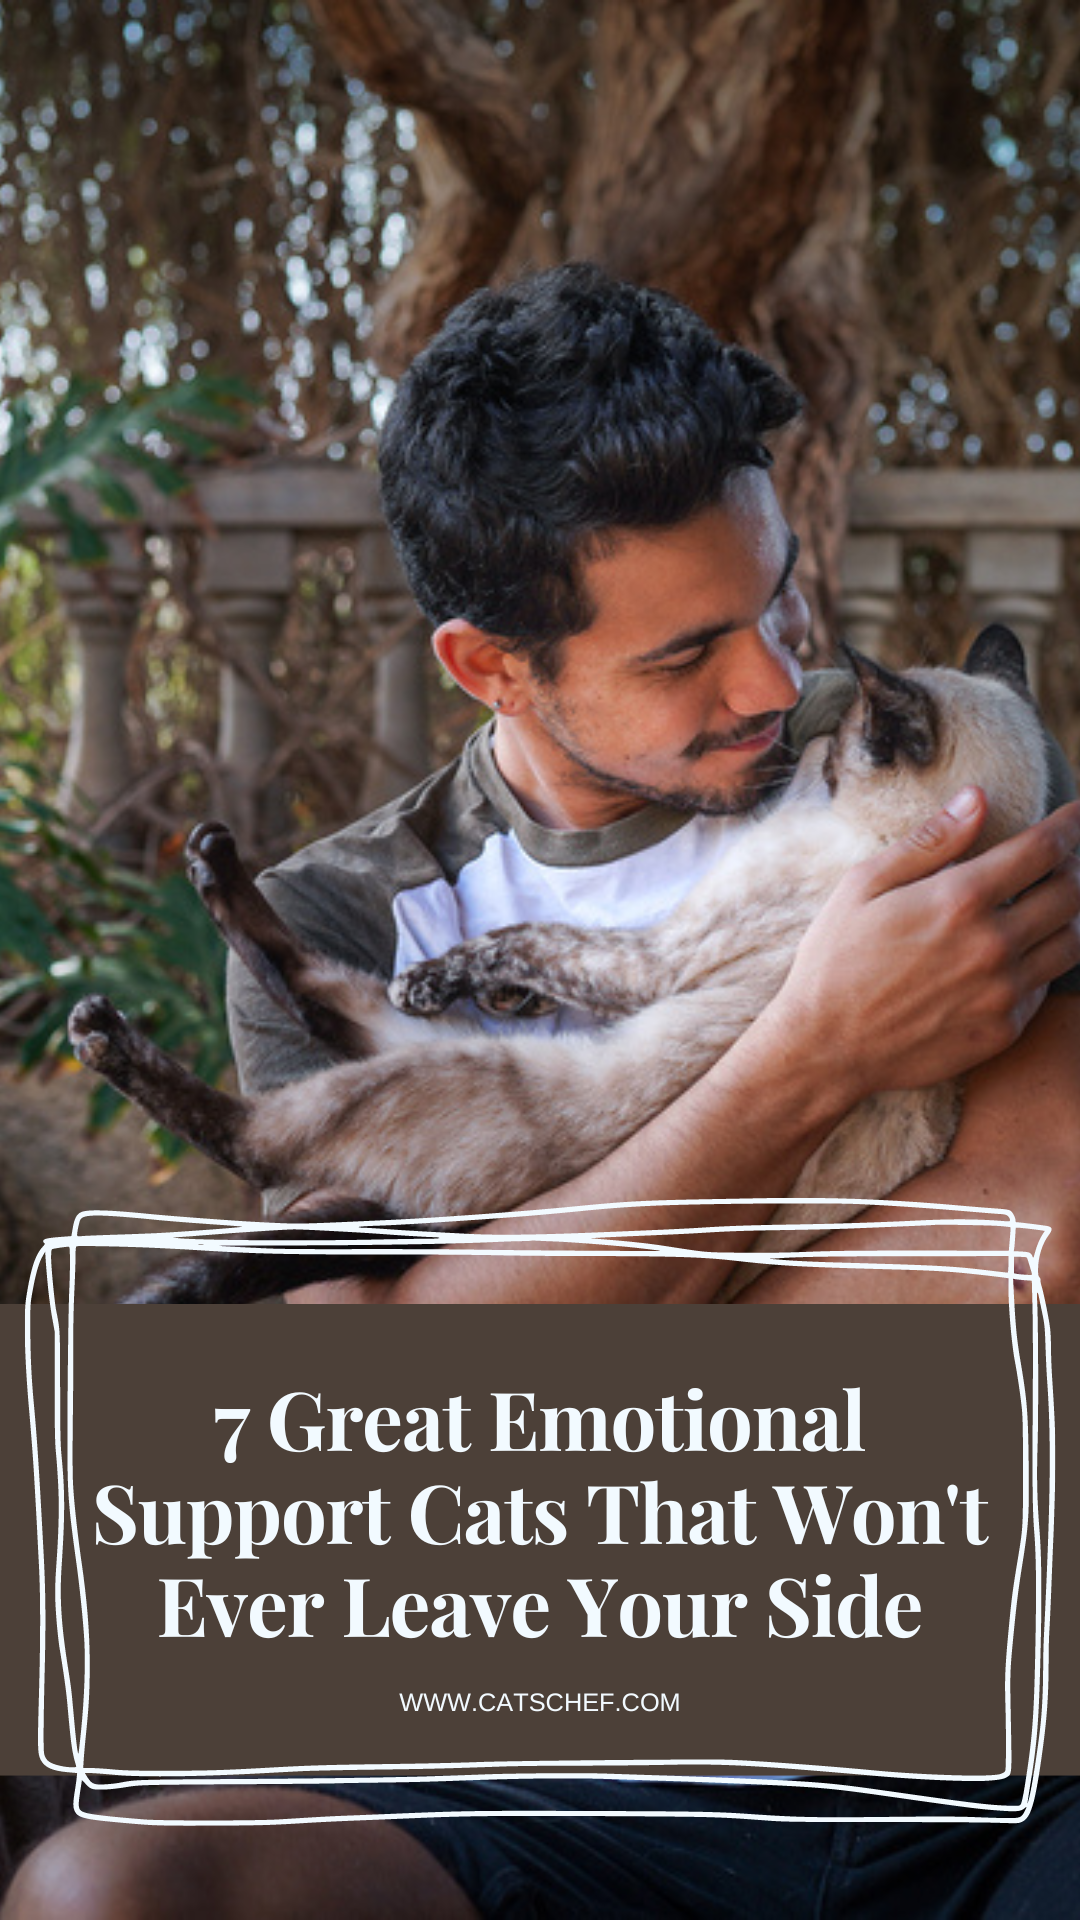 7 Great Emotional Support Cats That Won't Ever Leave Your Side